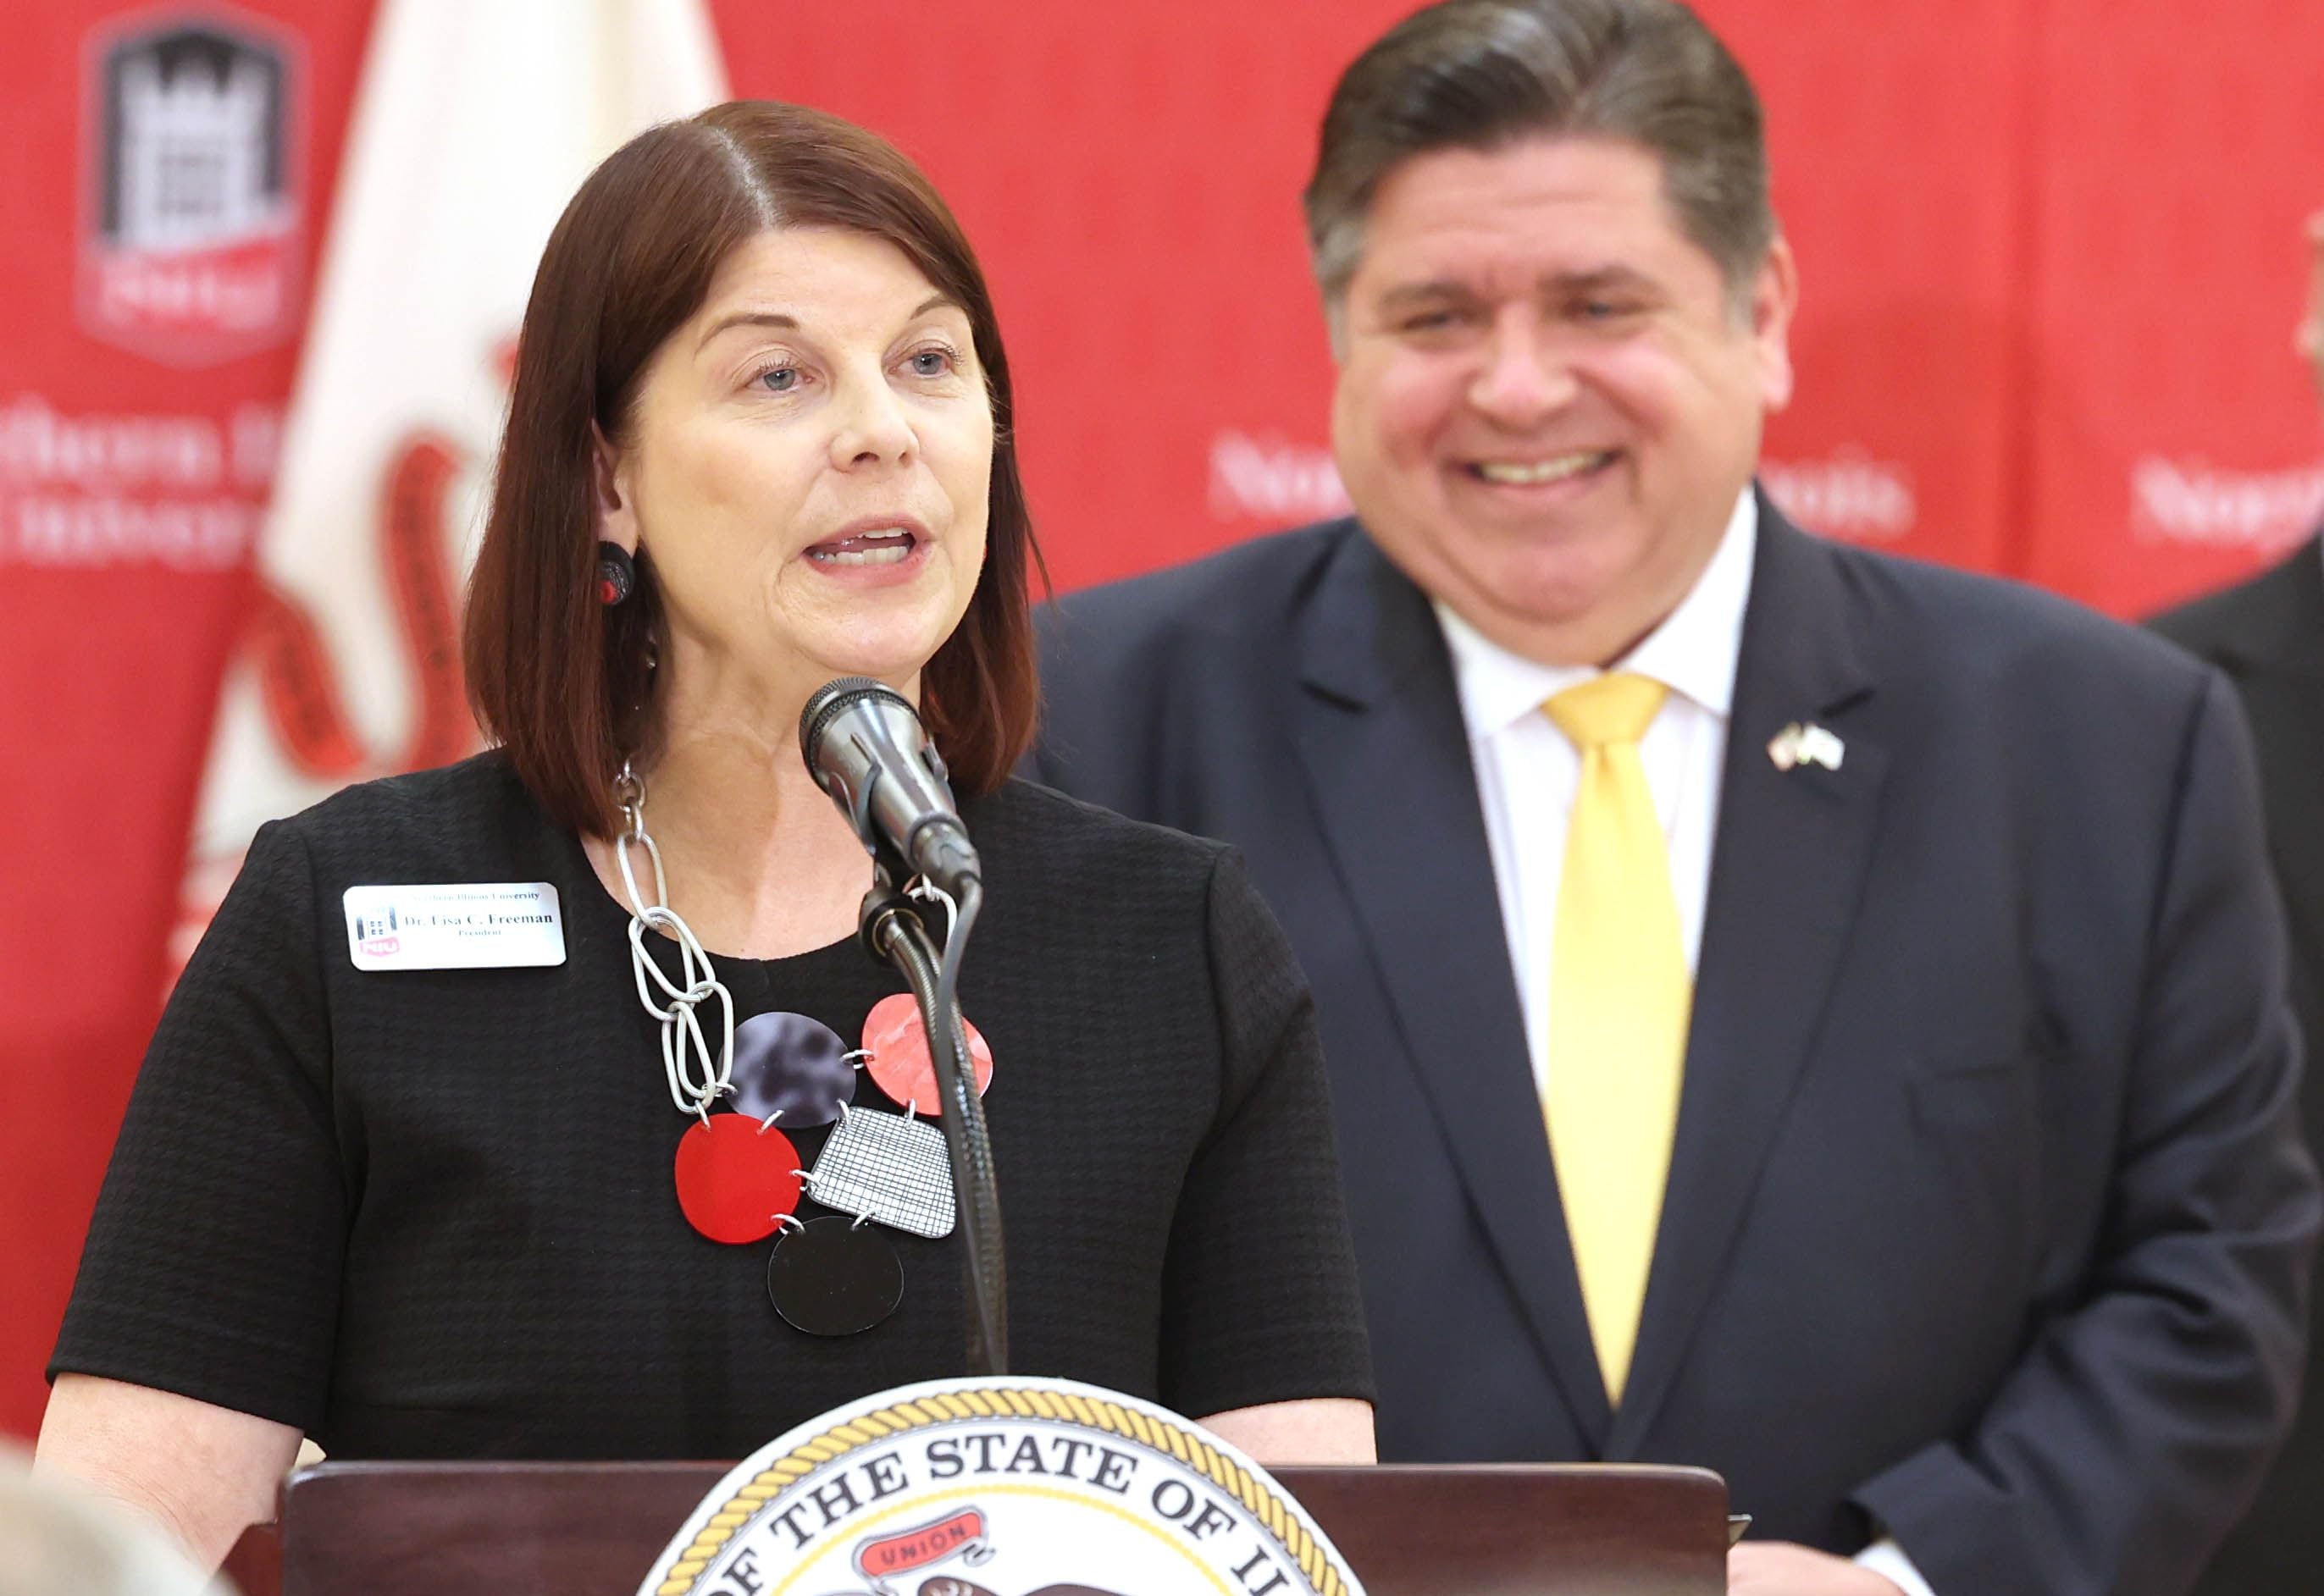 Northern Illinois University President Lisa Freeman speaks as Gov. JB Pritzker looks on during a news conference Tuesday, April, 4, 2023, in the Barsema Alumni and Visitors Center at Northern Illinois University in DeKalb. Pritzker along with a group of llinois lawmakers, DeKalb city officials and representatives from NIU were on hand to promote the importance of funding higher education in Illinois.